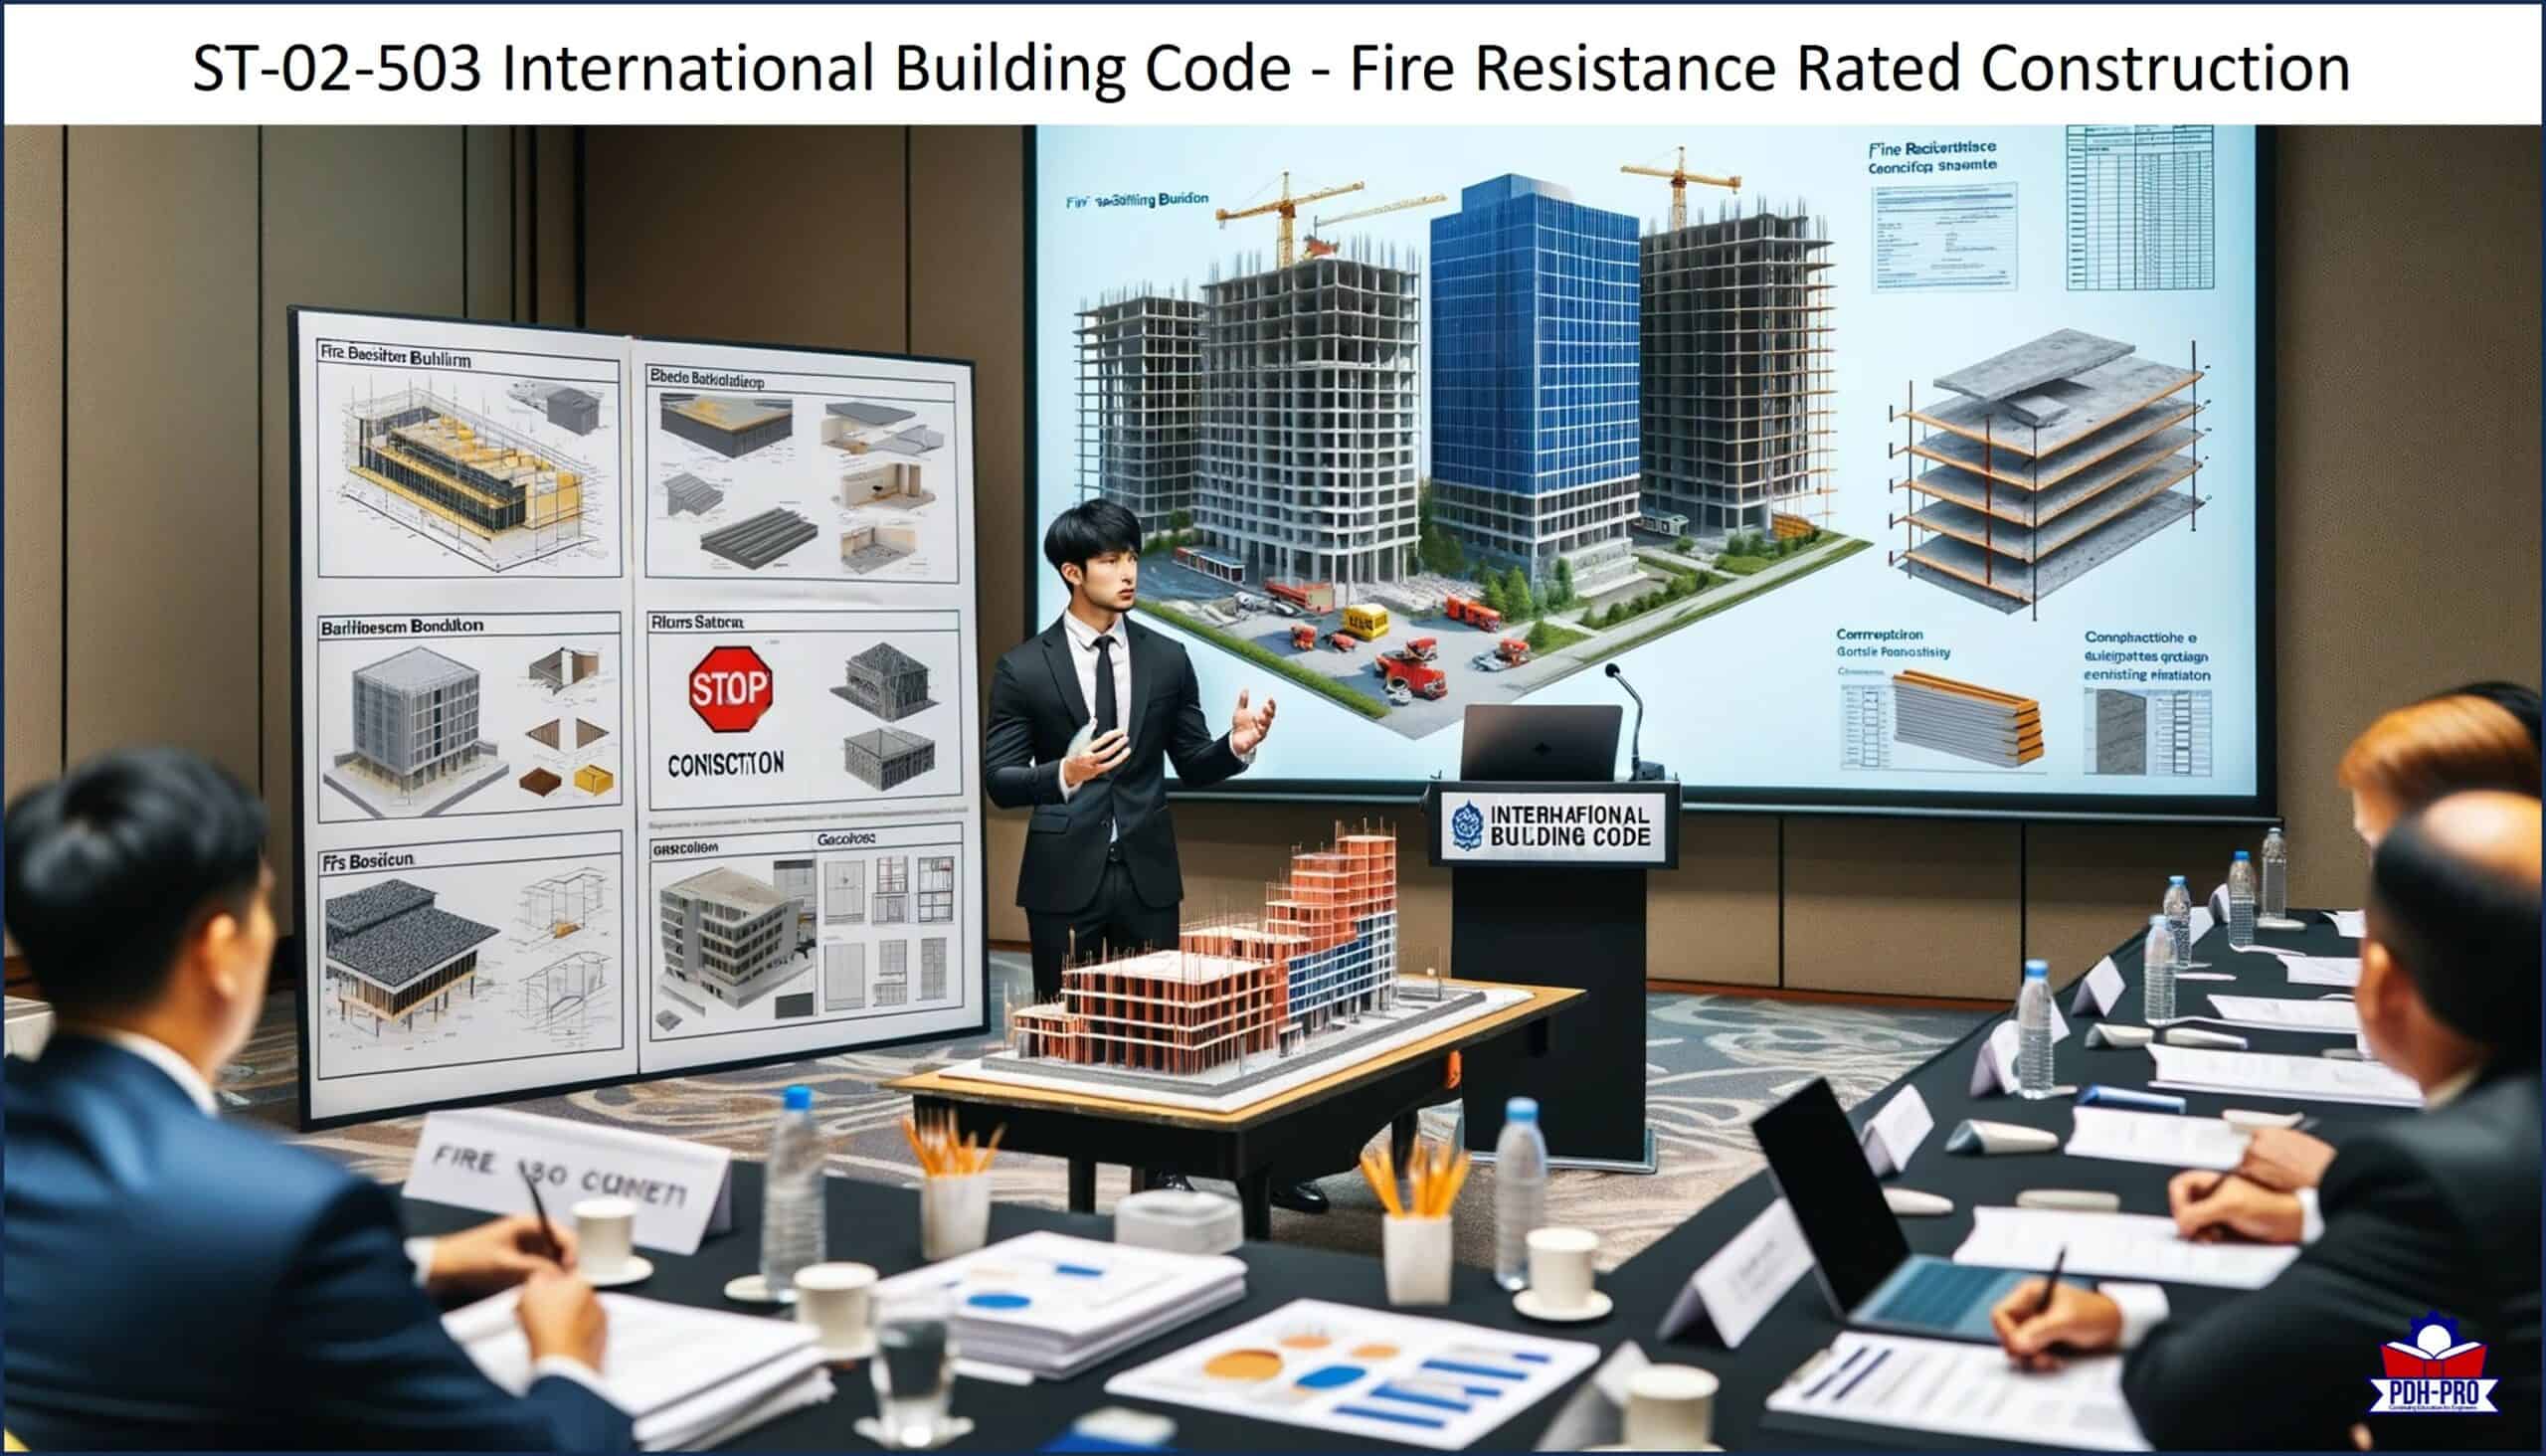 International Building Code - Fire Resistance Rated Construction